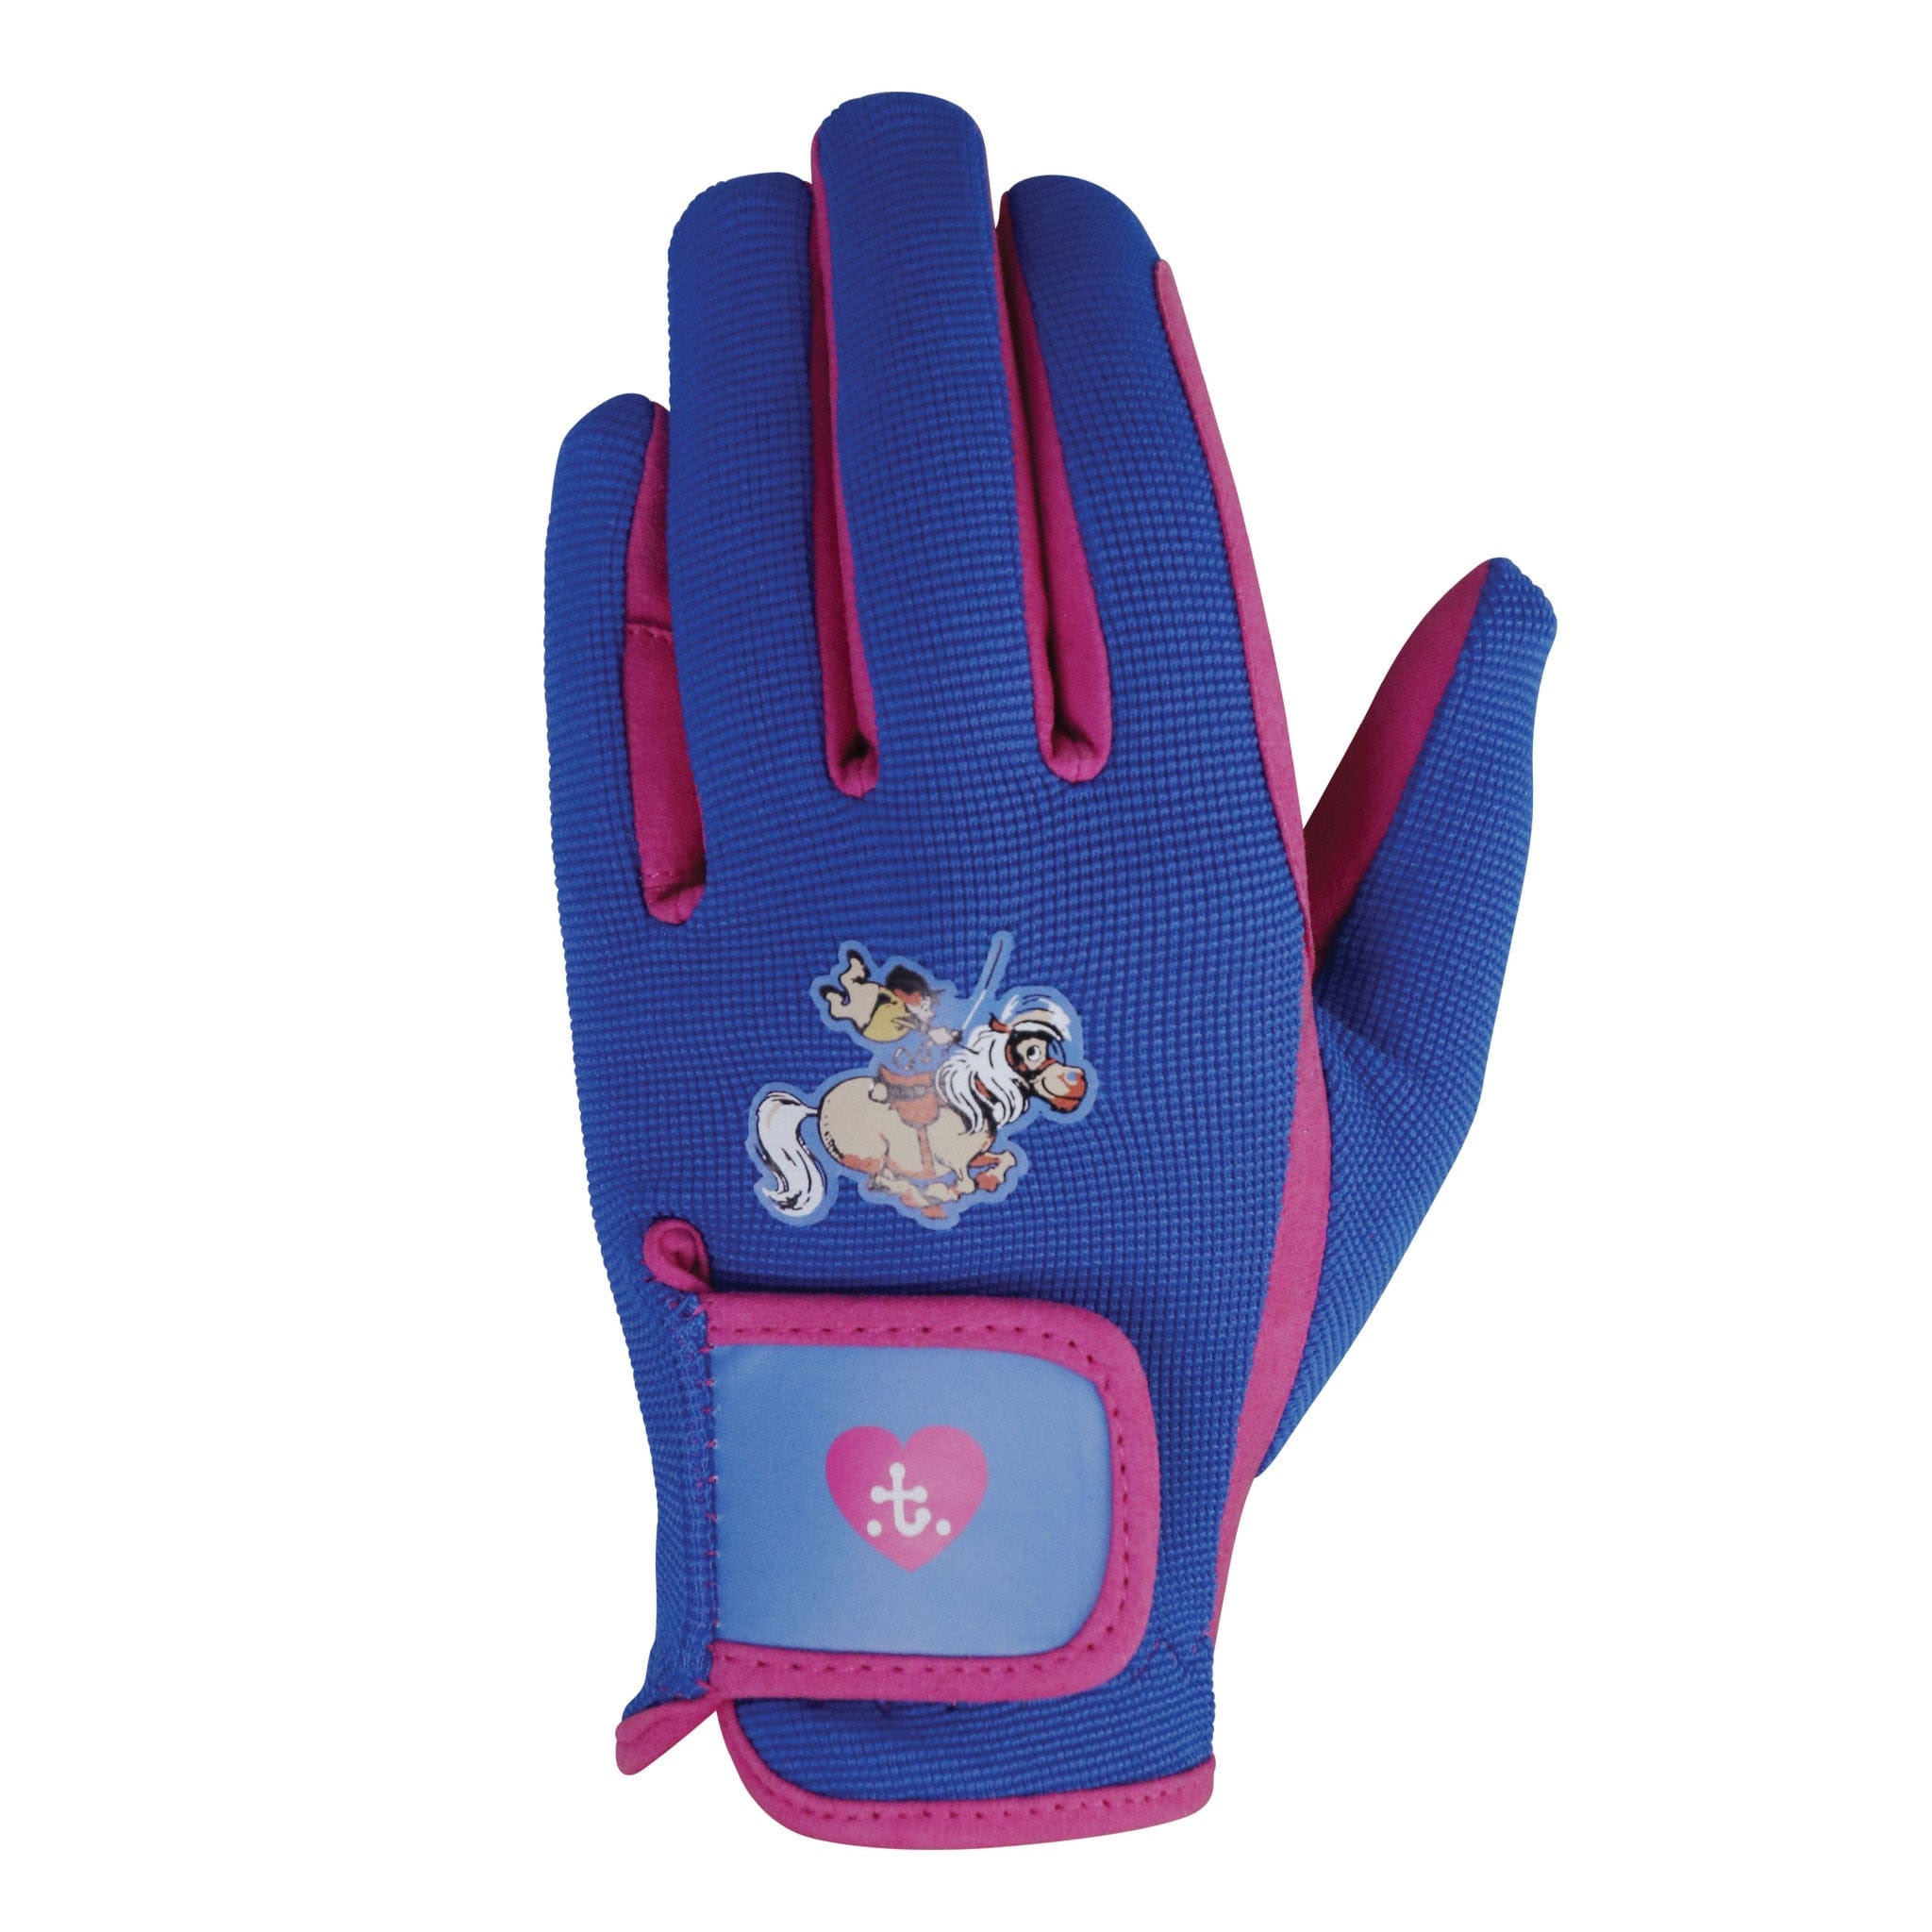 Hy Equestrian Children's Thelwell Race Riding Gloves